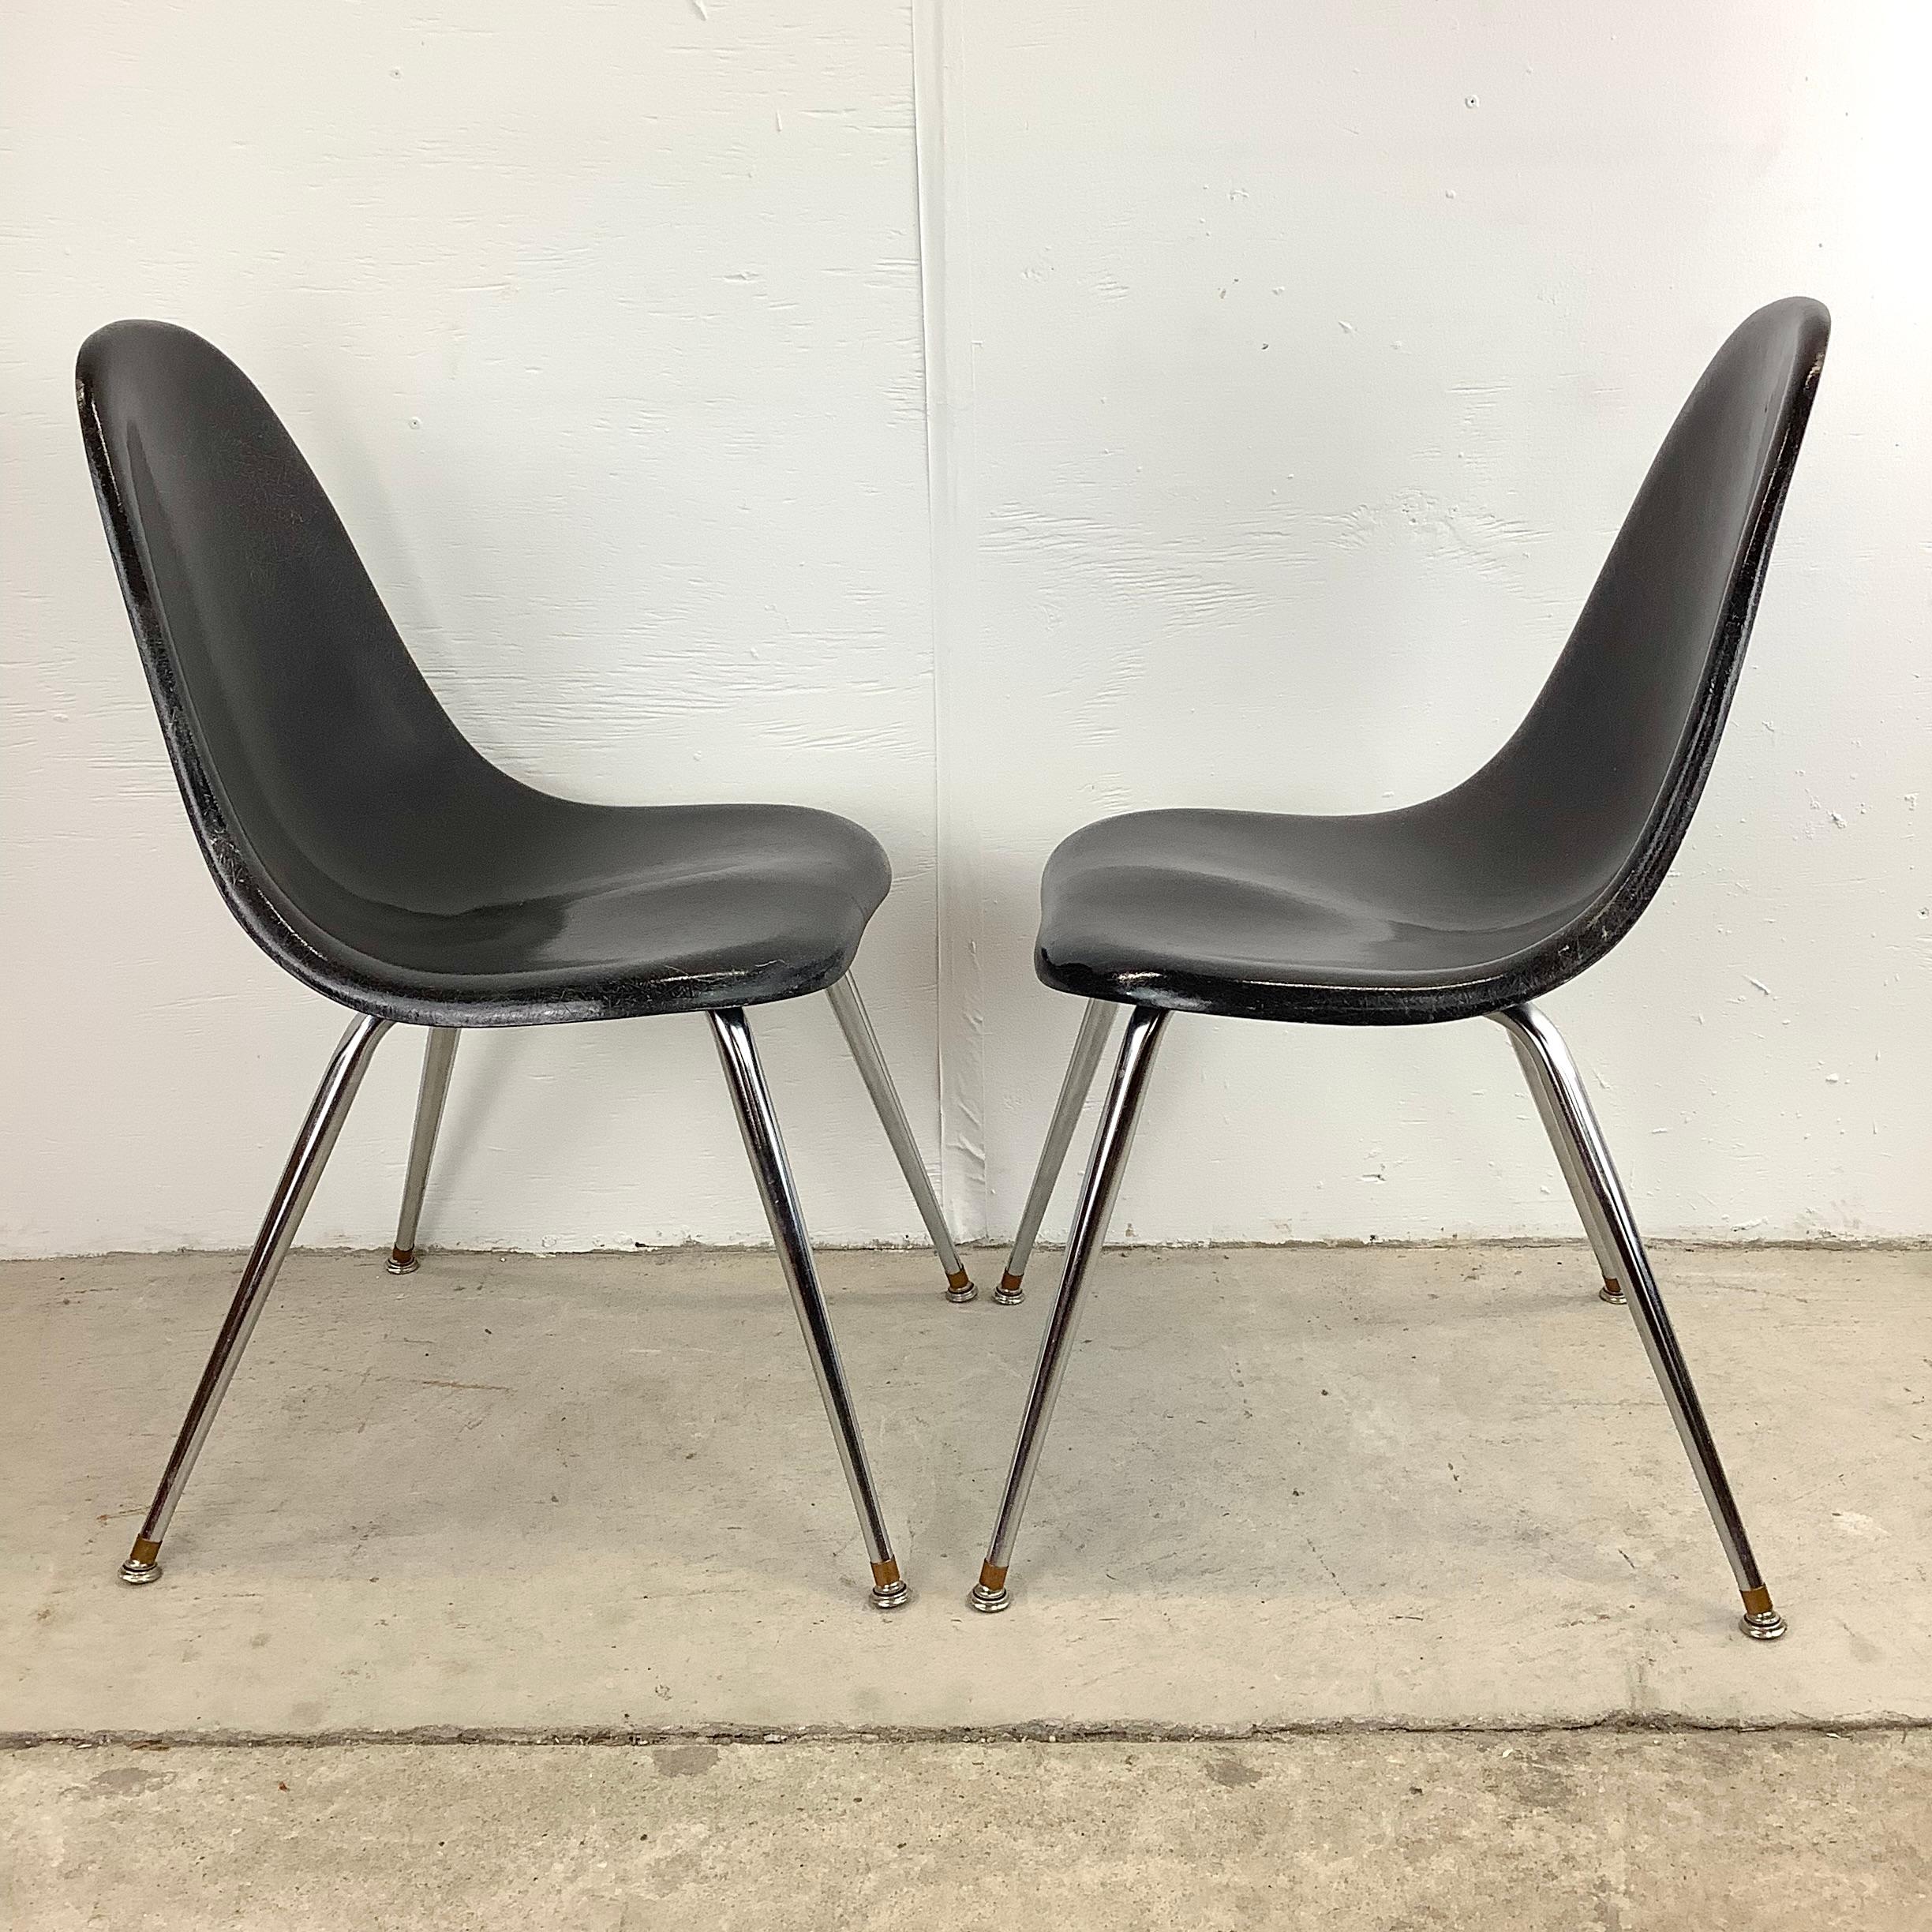 This pair of Mid-Century Molded Fiberglass Shell Side Chairs from Chromcraft make a timeless fusion of mid-century design and modern comfort. These iconic chairs effortlessly capture the essence of an era while providing a touch of sophistication to